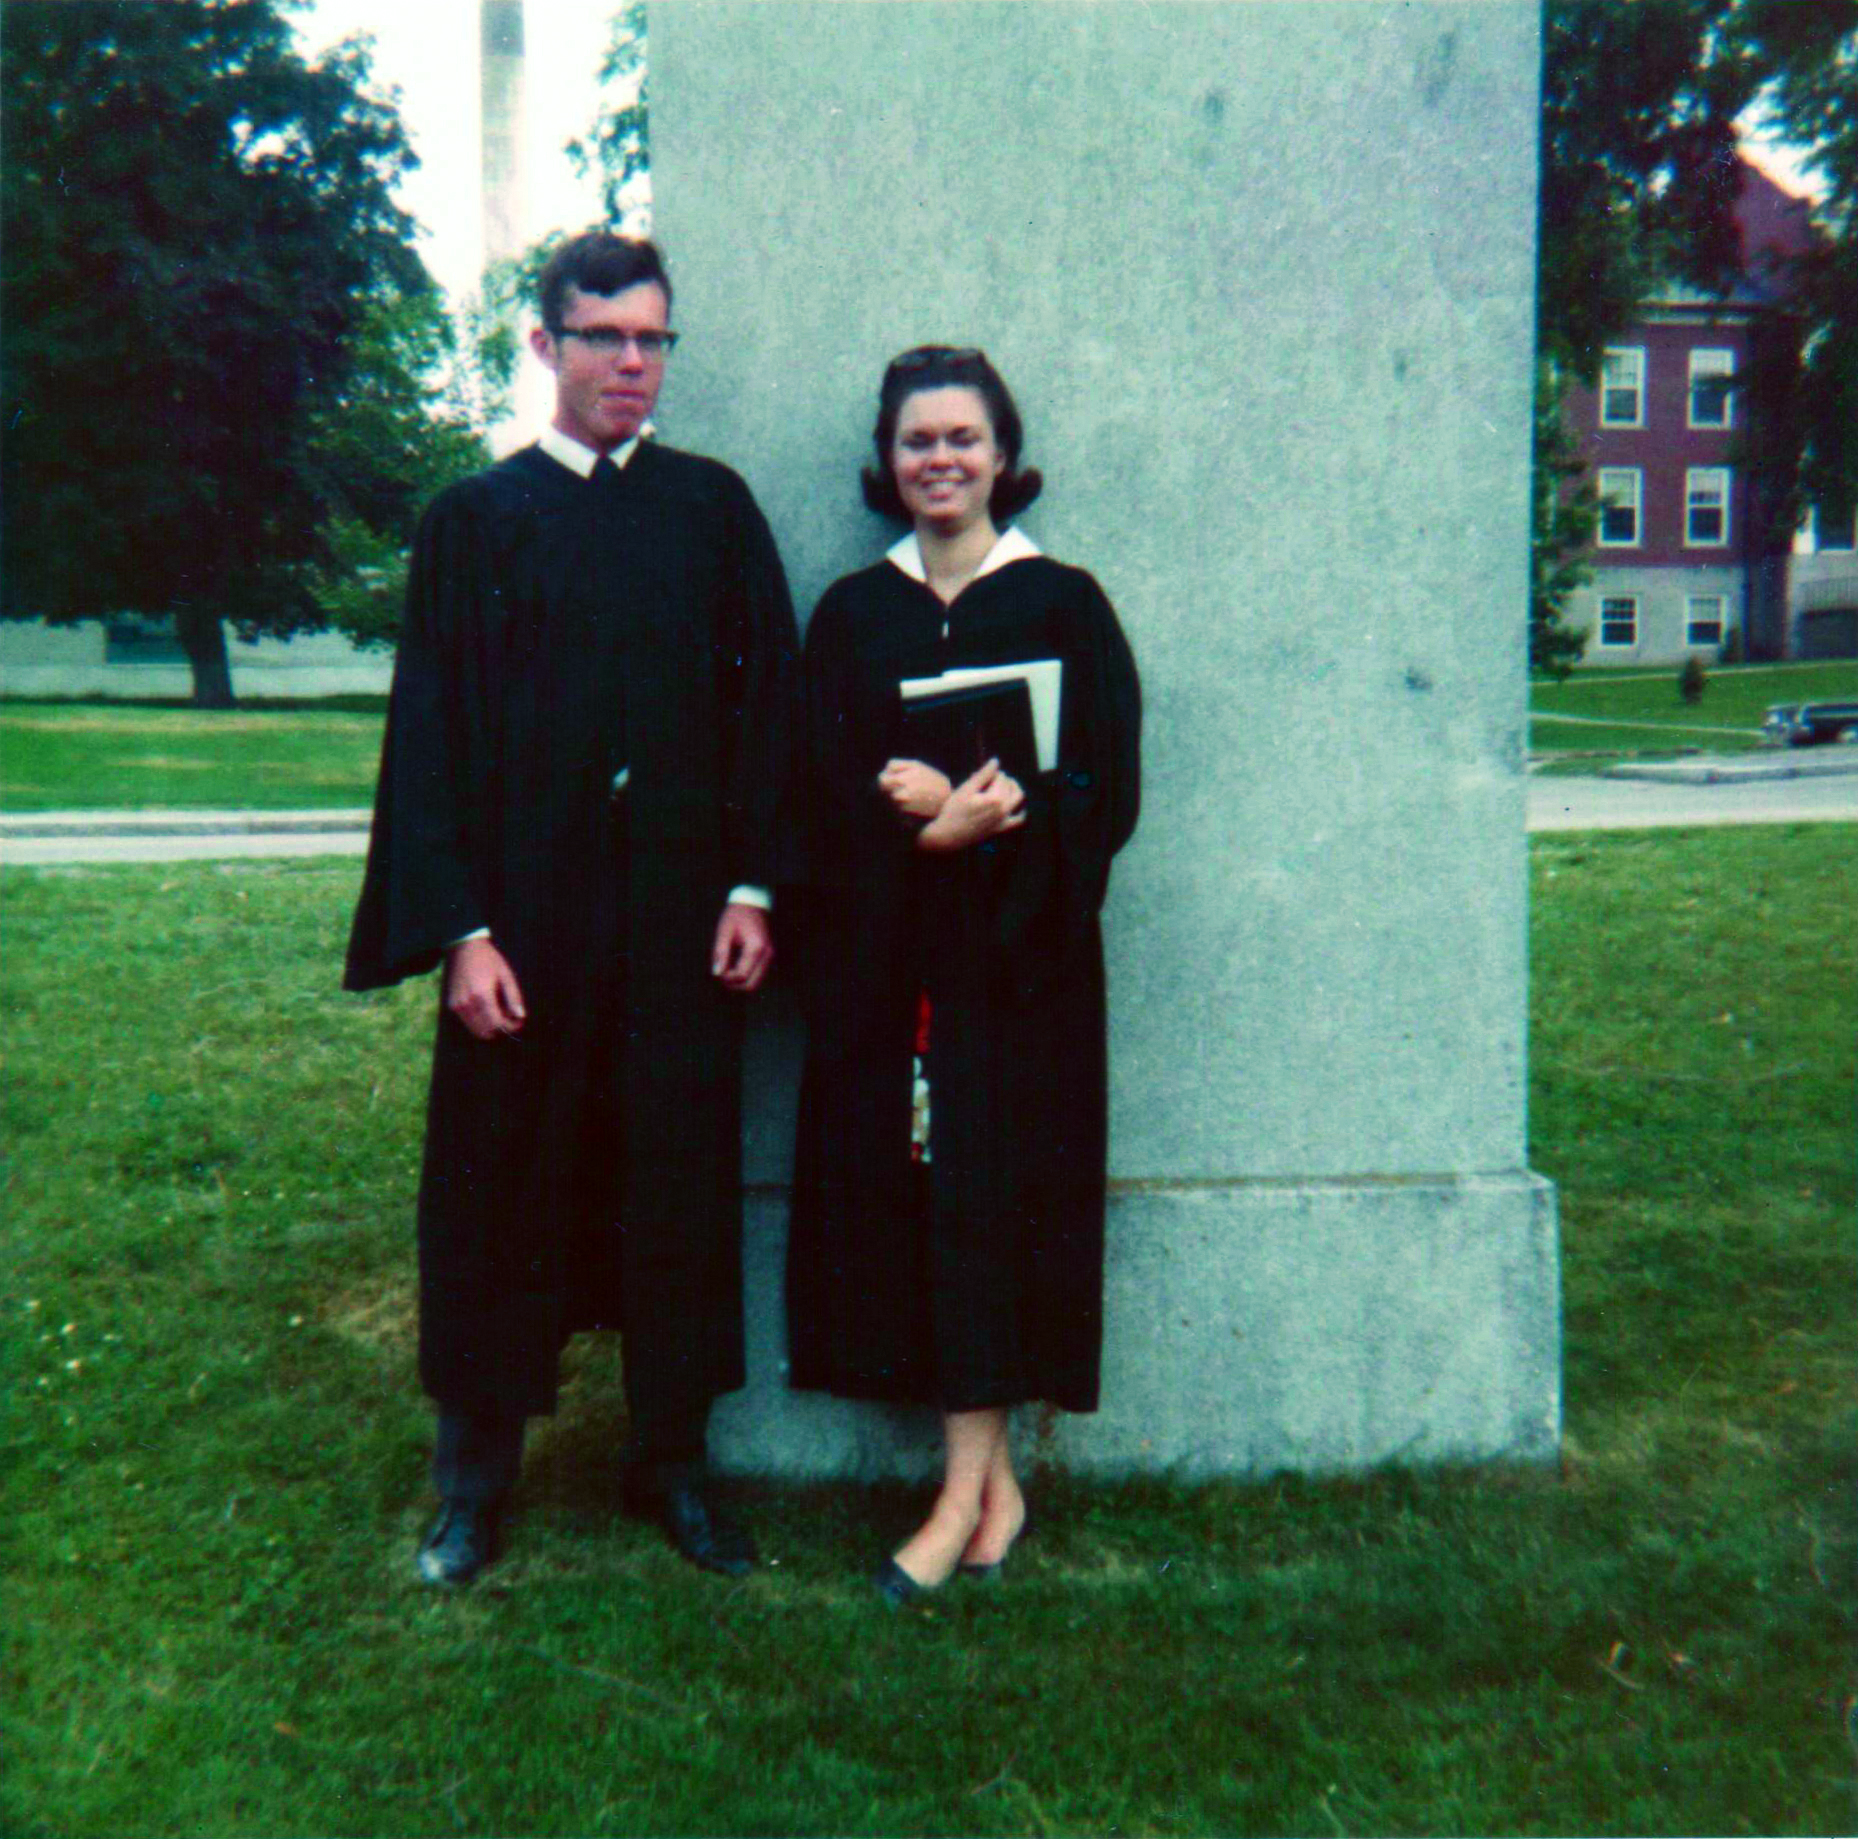 Terry and Jean Jones Graduate from UNH in 1969